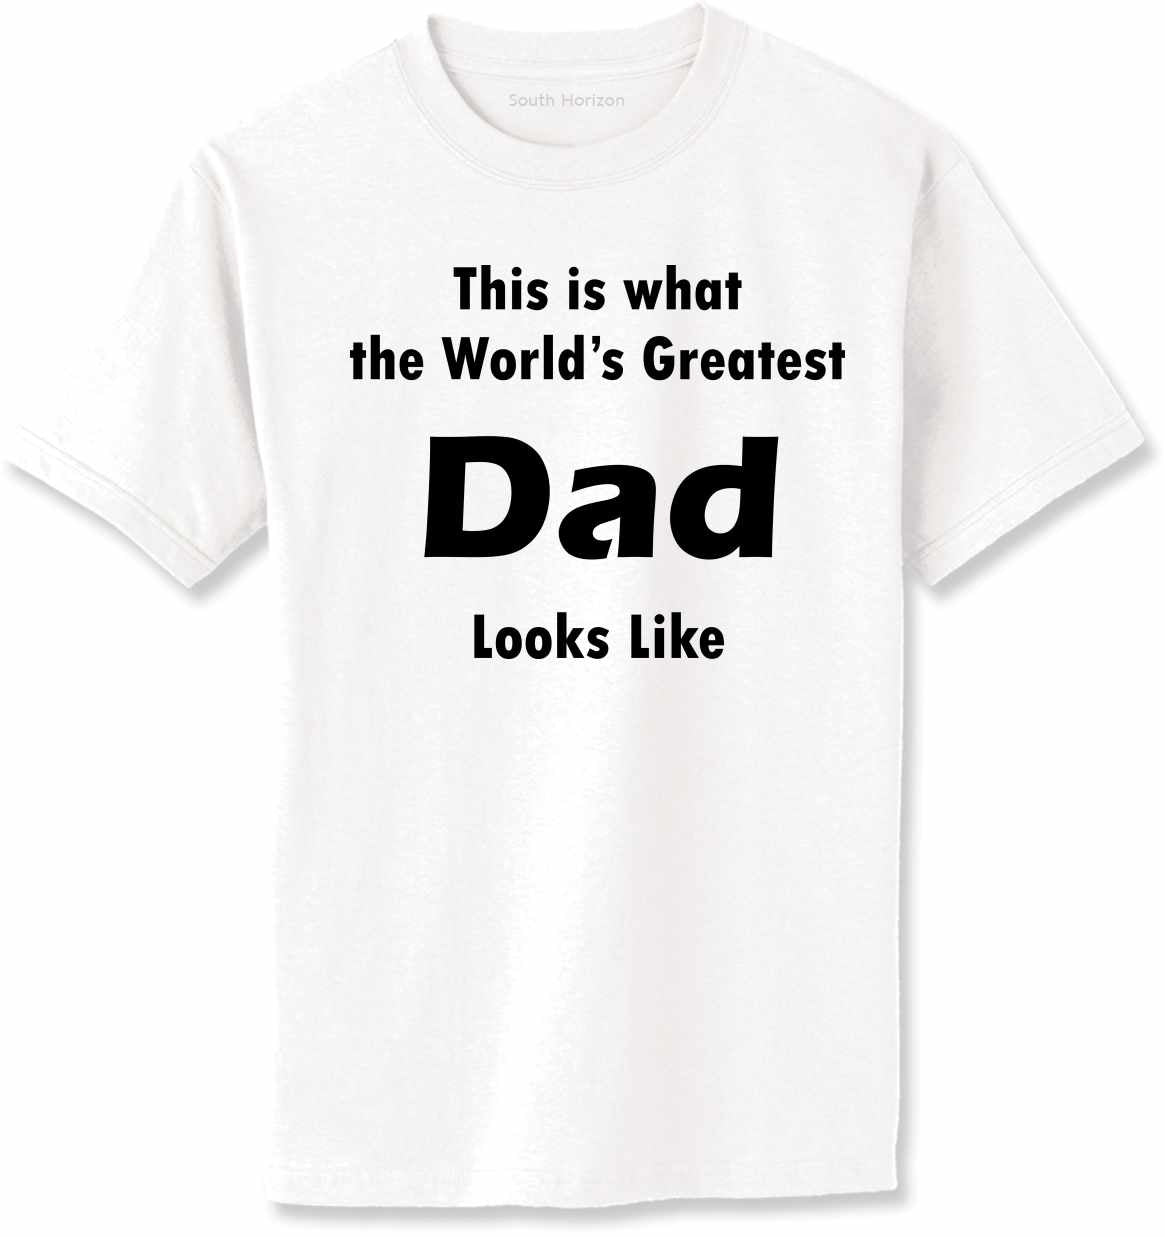 This is what the World's Greatest Dad Looks Like Adult T-Shirt (#490-1)